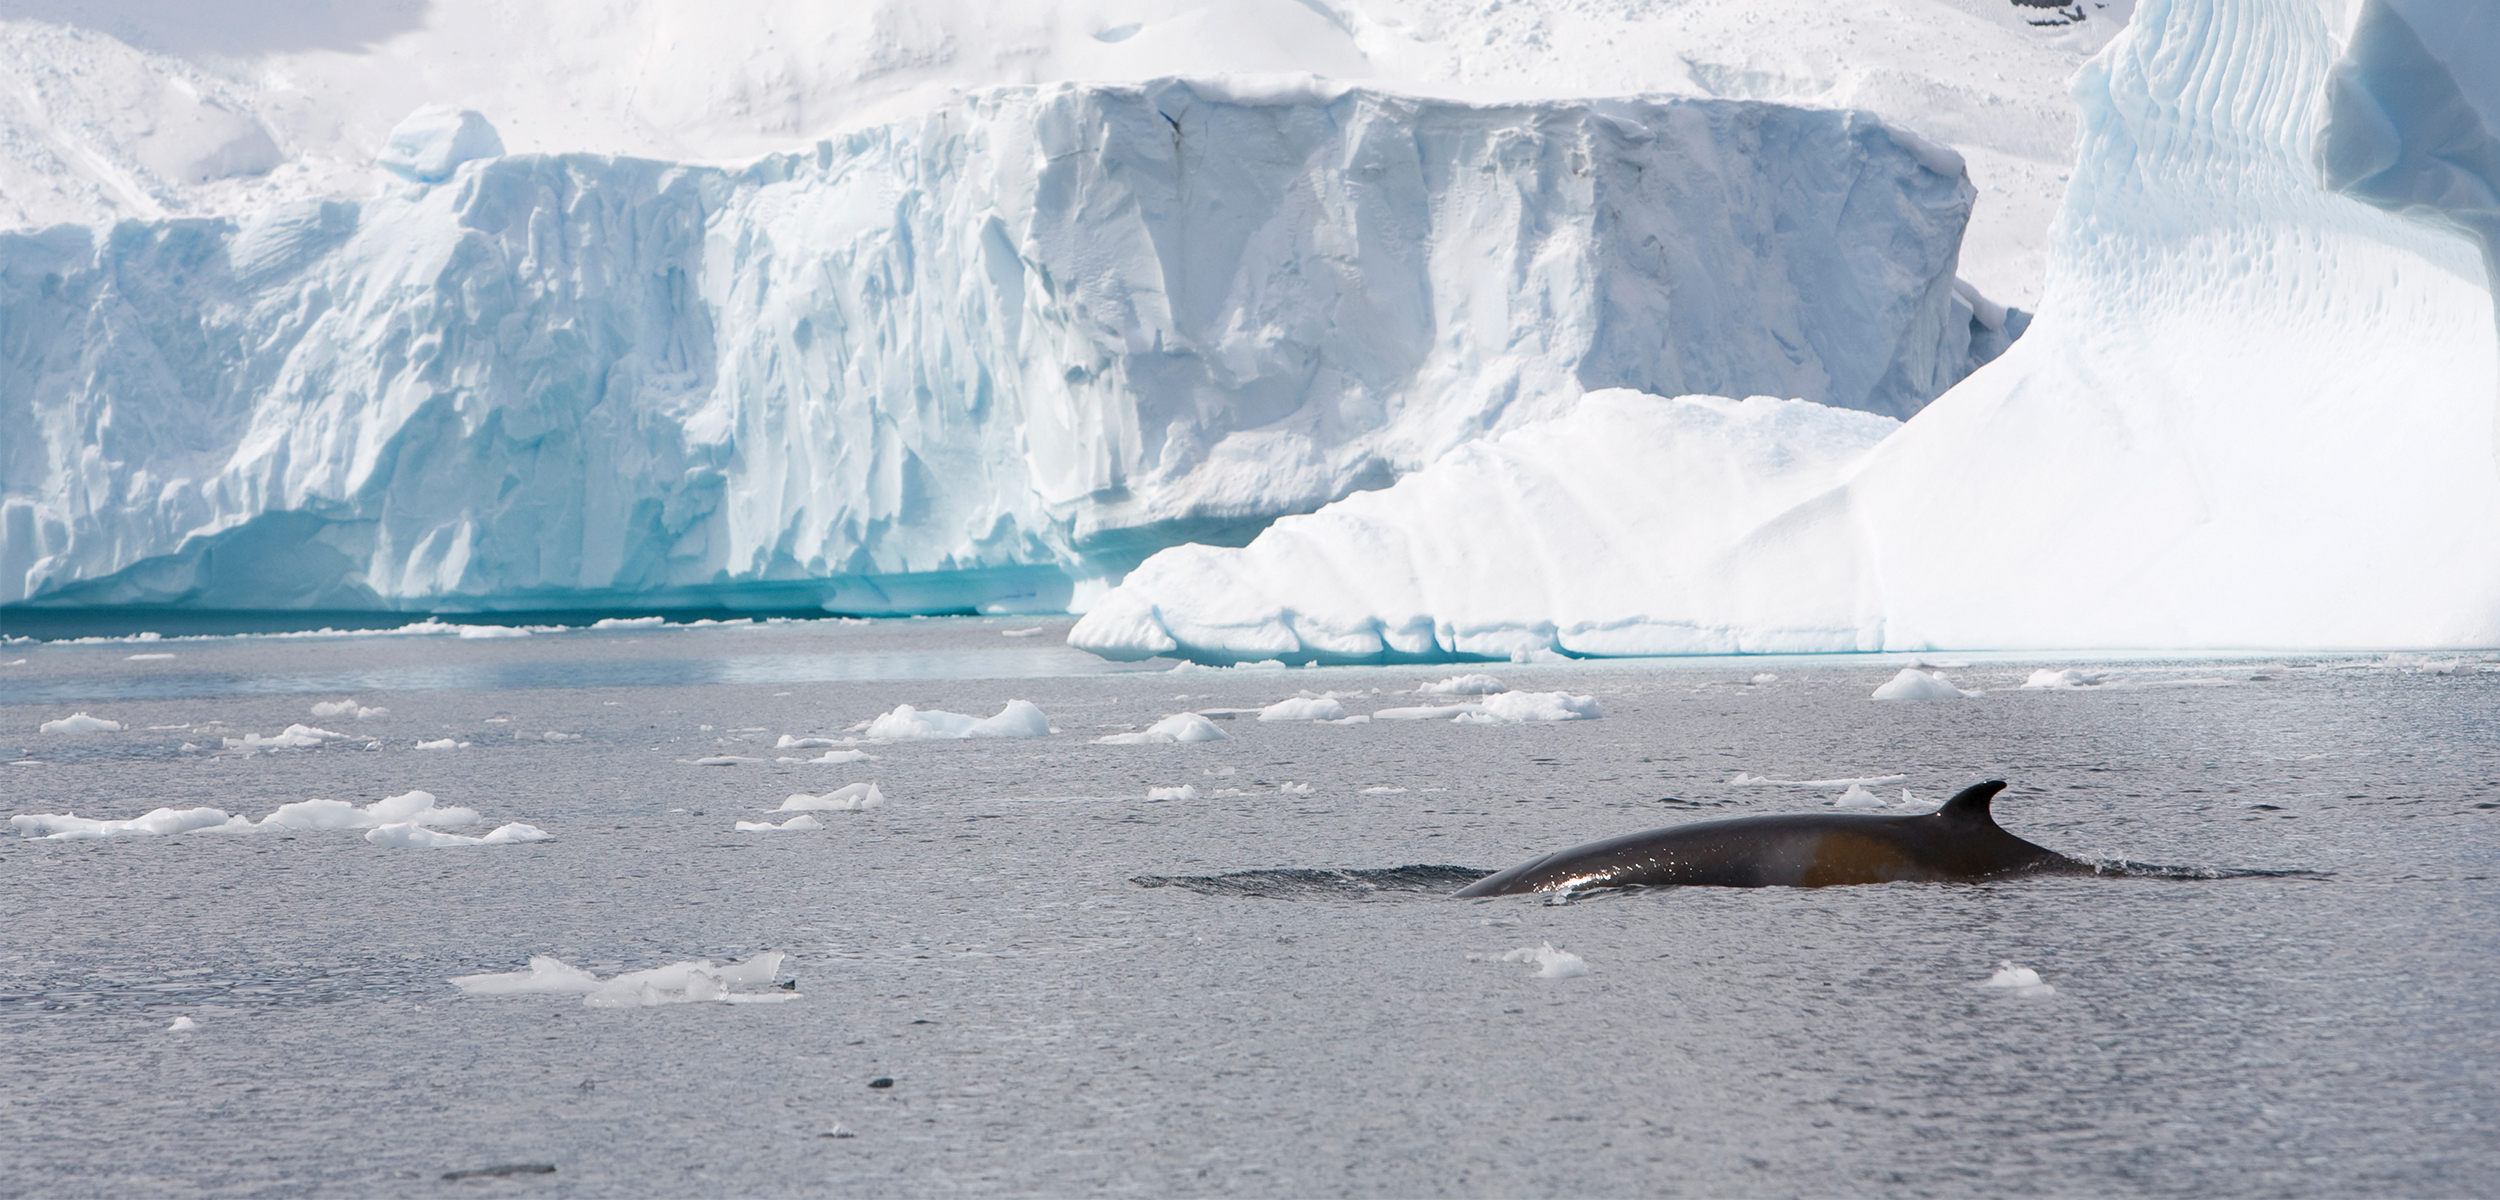 A black fin of a minke whale pops above the antarctic waters with mounds of ice behind.